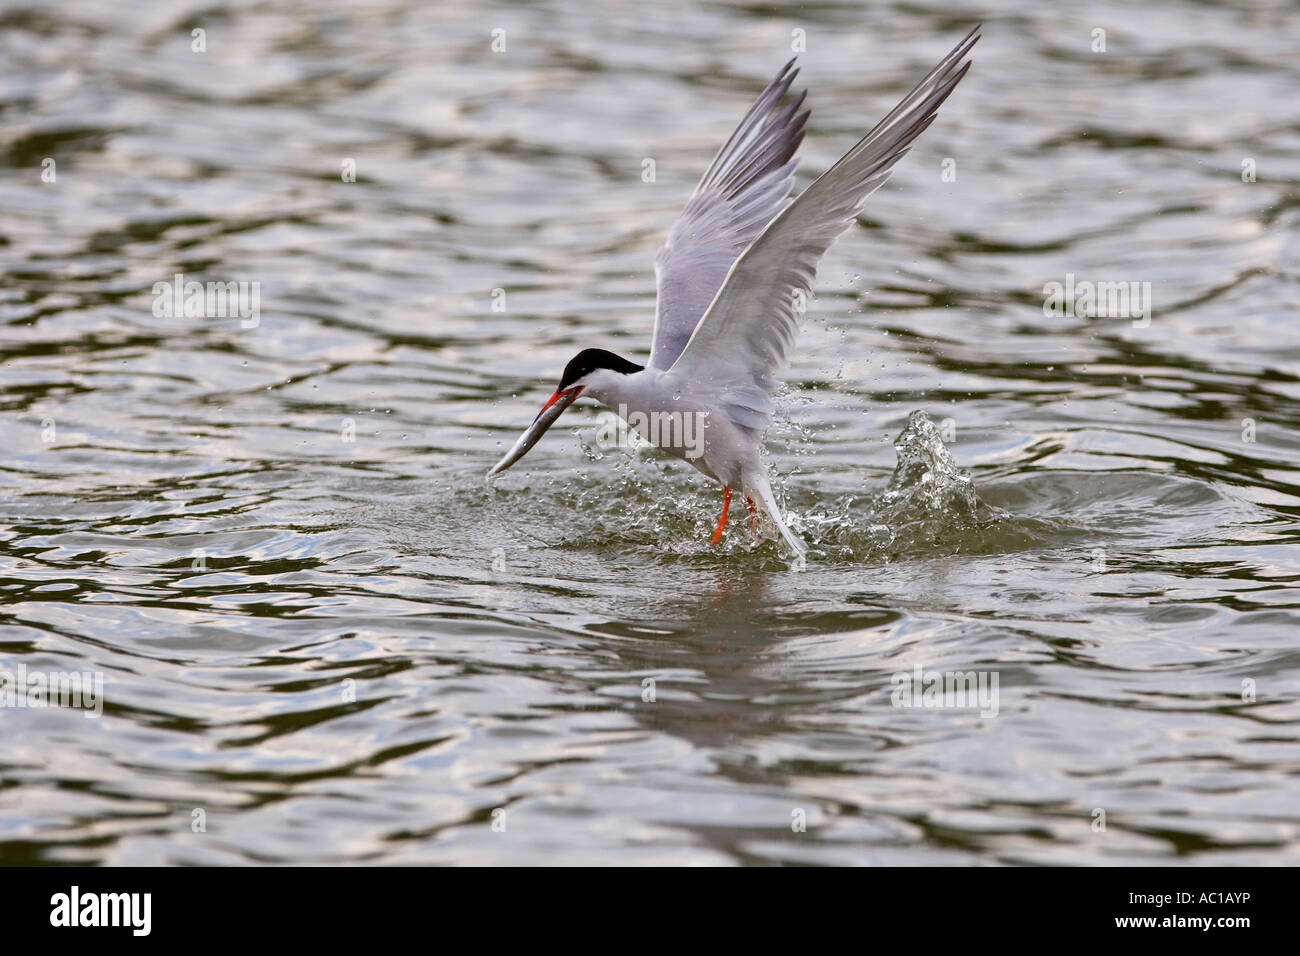 Common Tern Sterna hirundo coming out of water with fish priory park Bedford Stock Photo